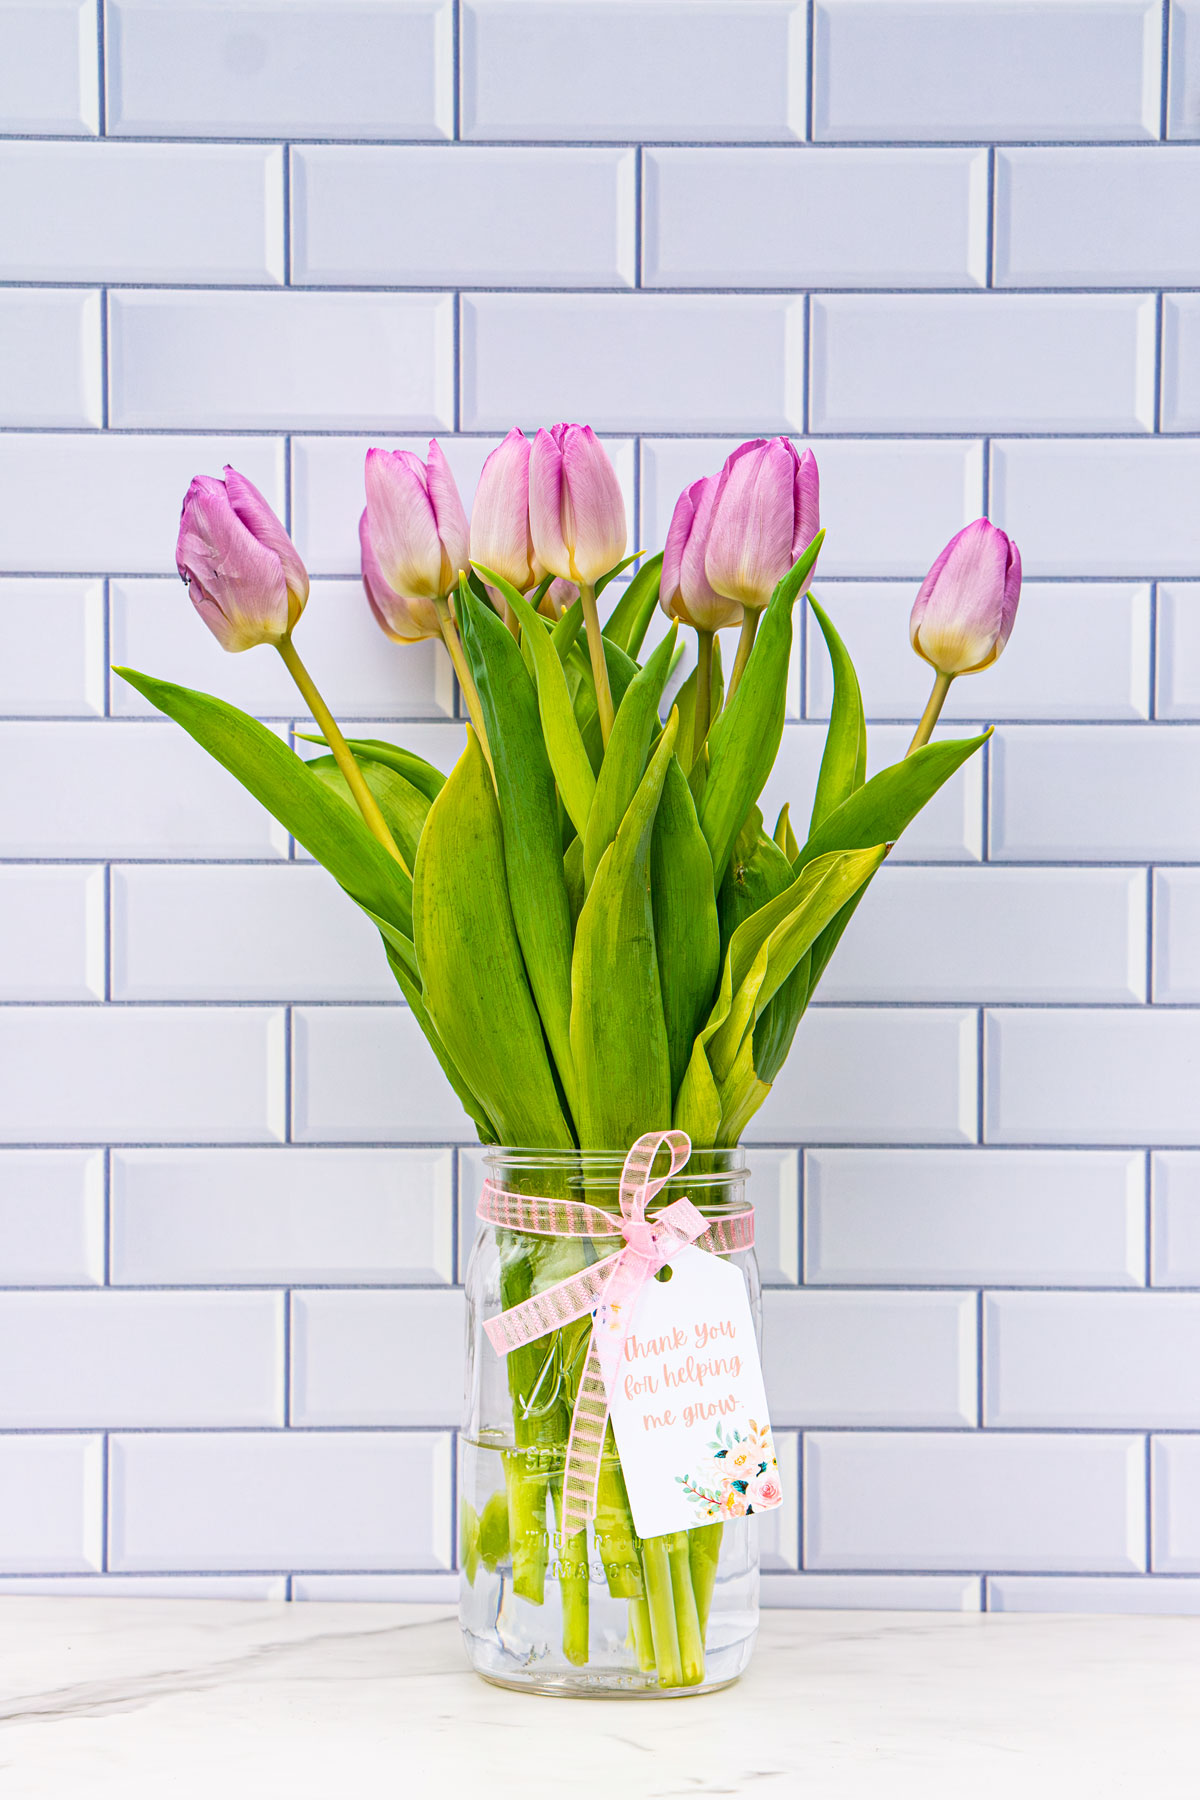 This image is of a mason jar of flowers (purple tulips) with a gift tag that says, "Thanks for helping me grow."